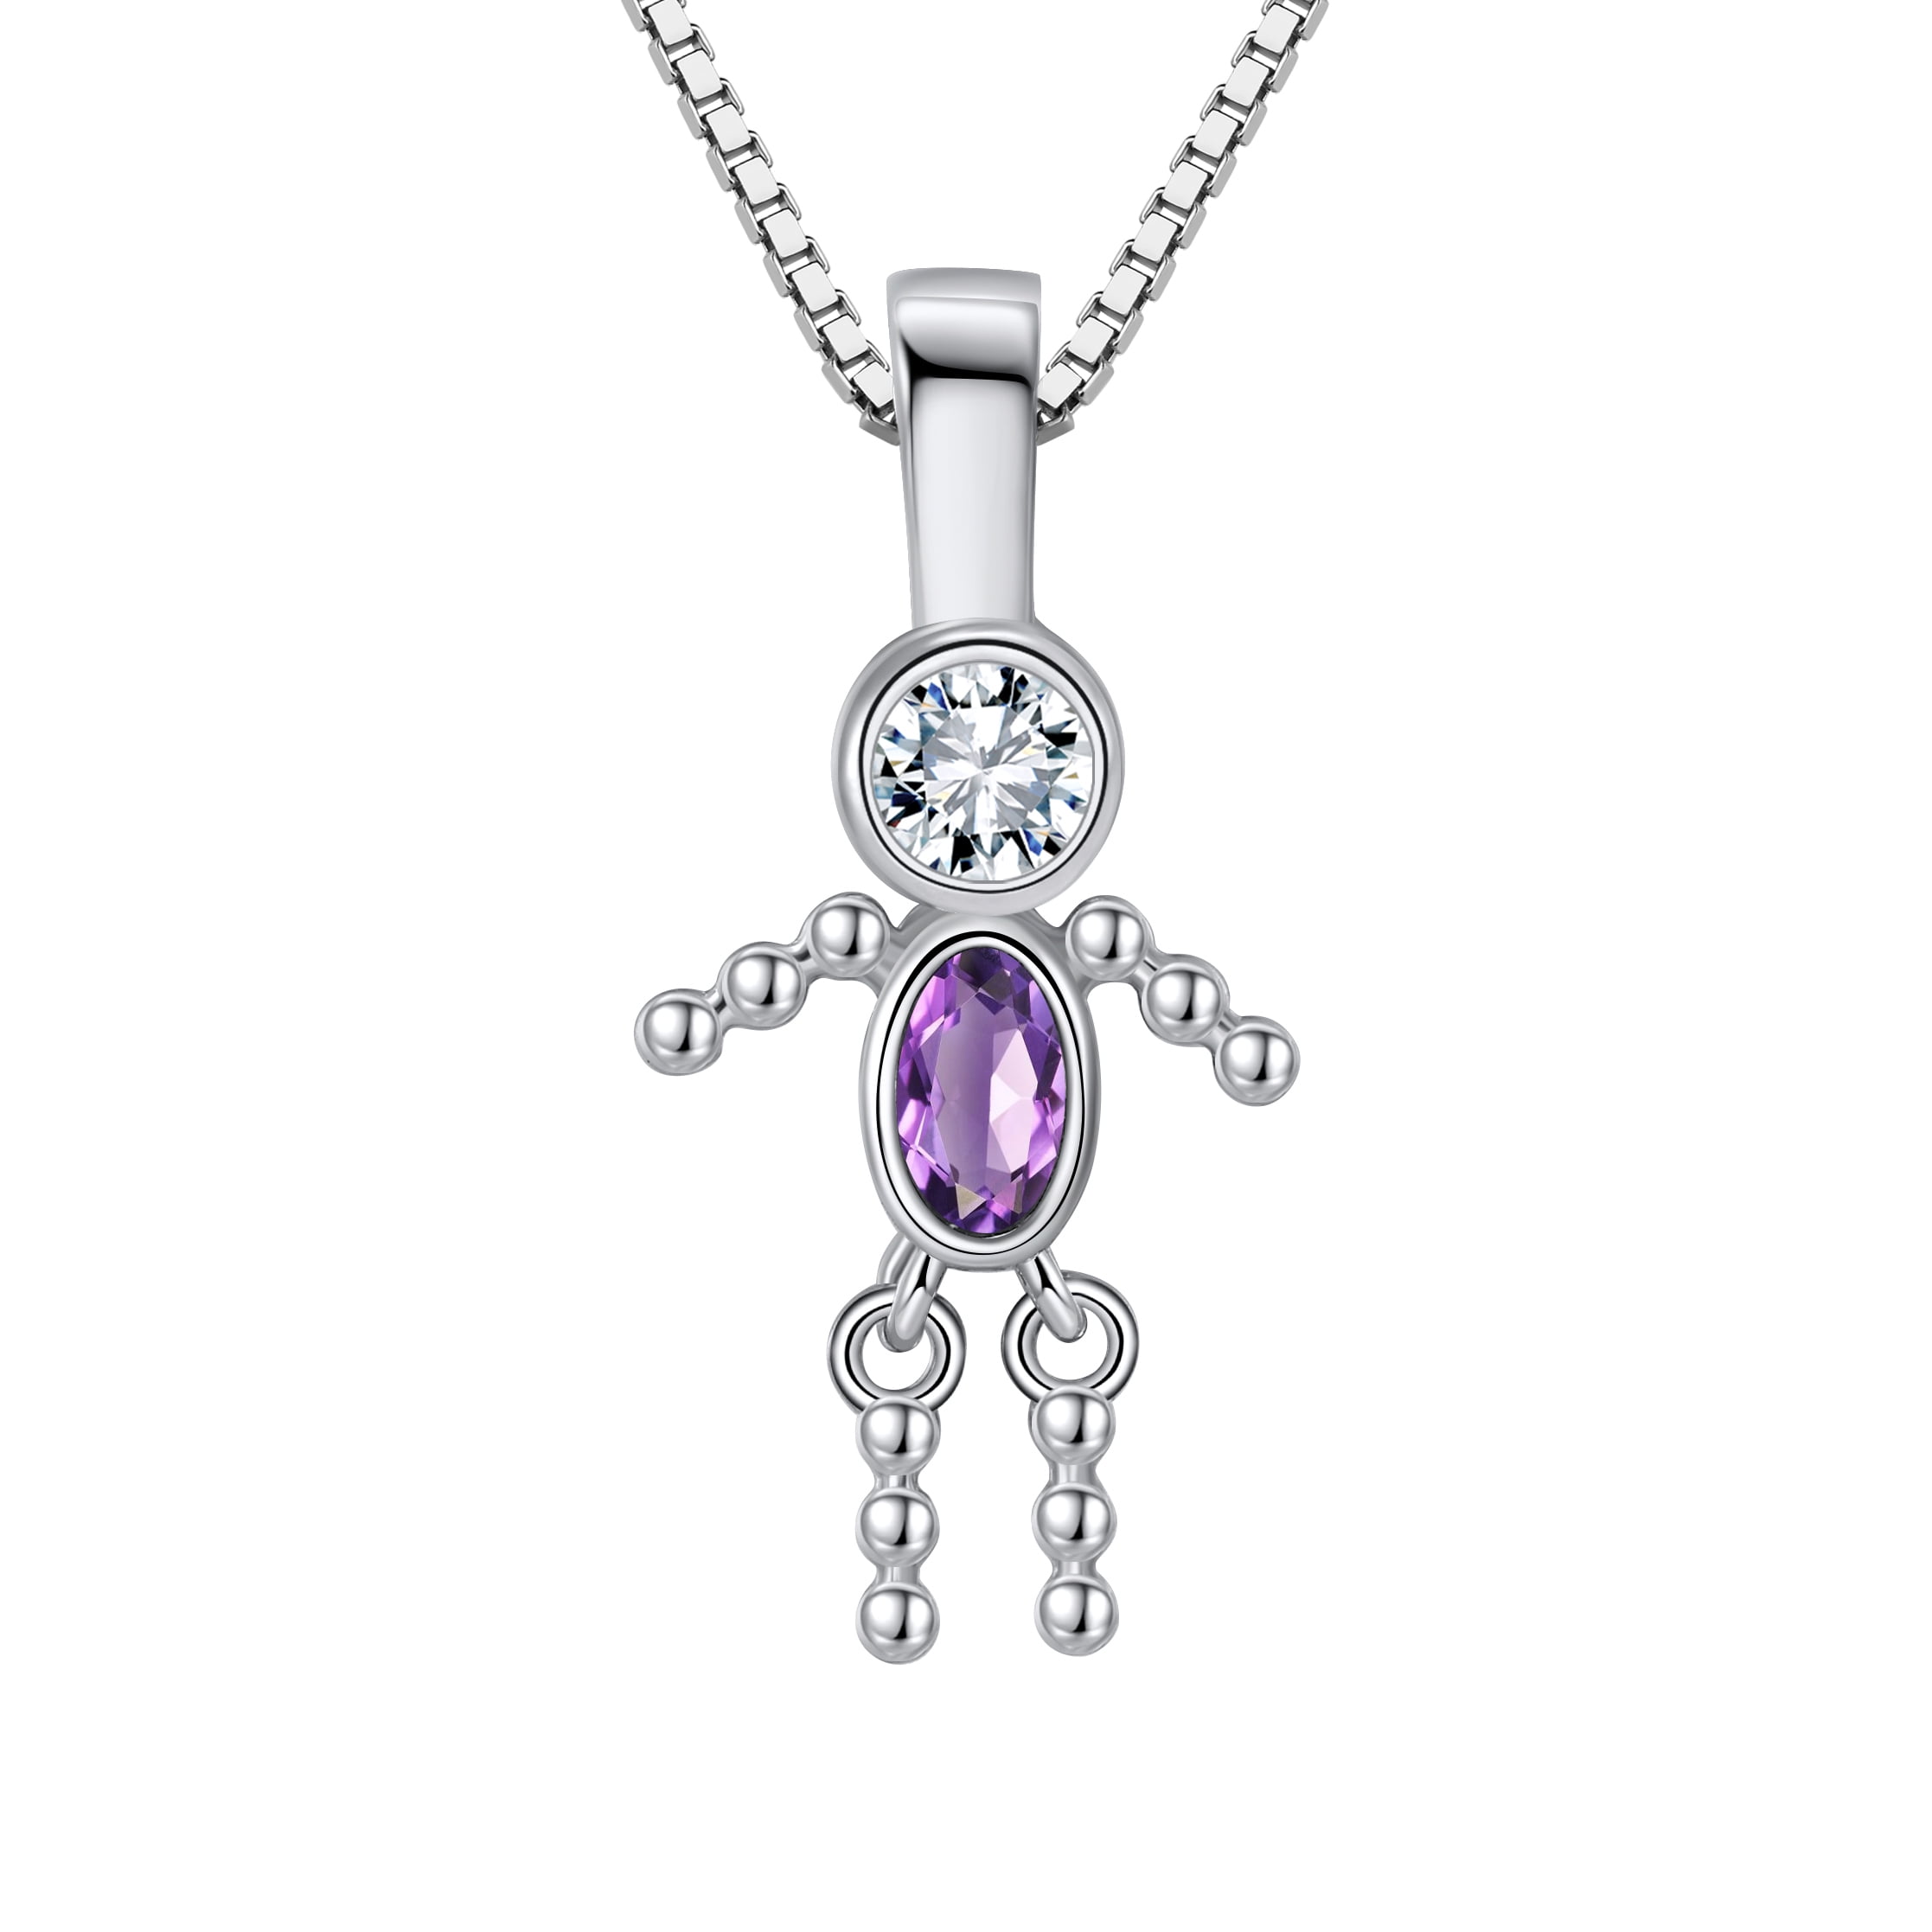 Little Girl or Boy Baby Birthstone Pendant Necklace for Mom or Grandma Ginger Lyne Collection 1a0bd5ae 5992 4ae7 9185 c044a4621c72.d57e63d9d2157e46beb5c64cad860f37